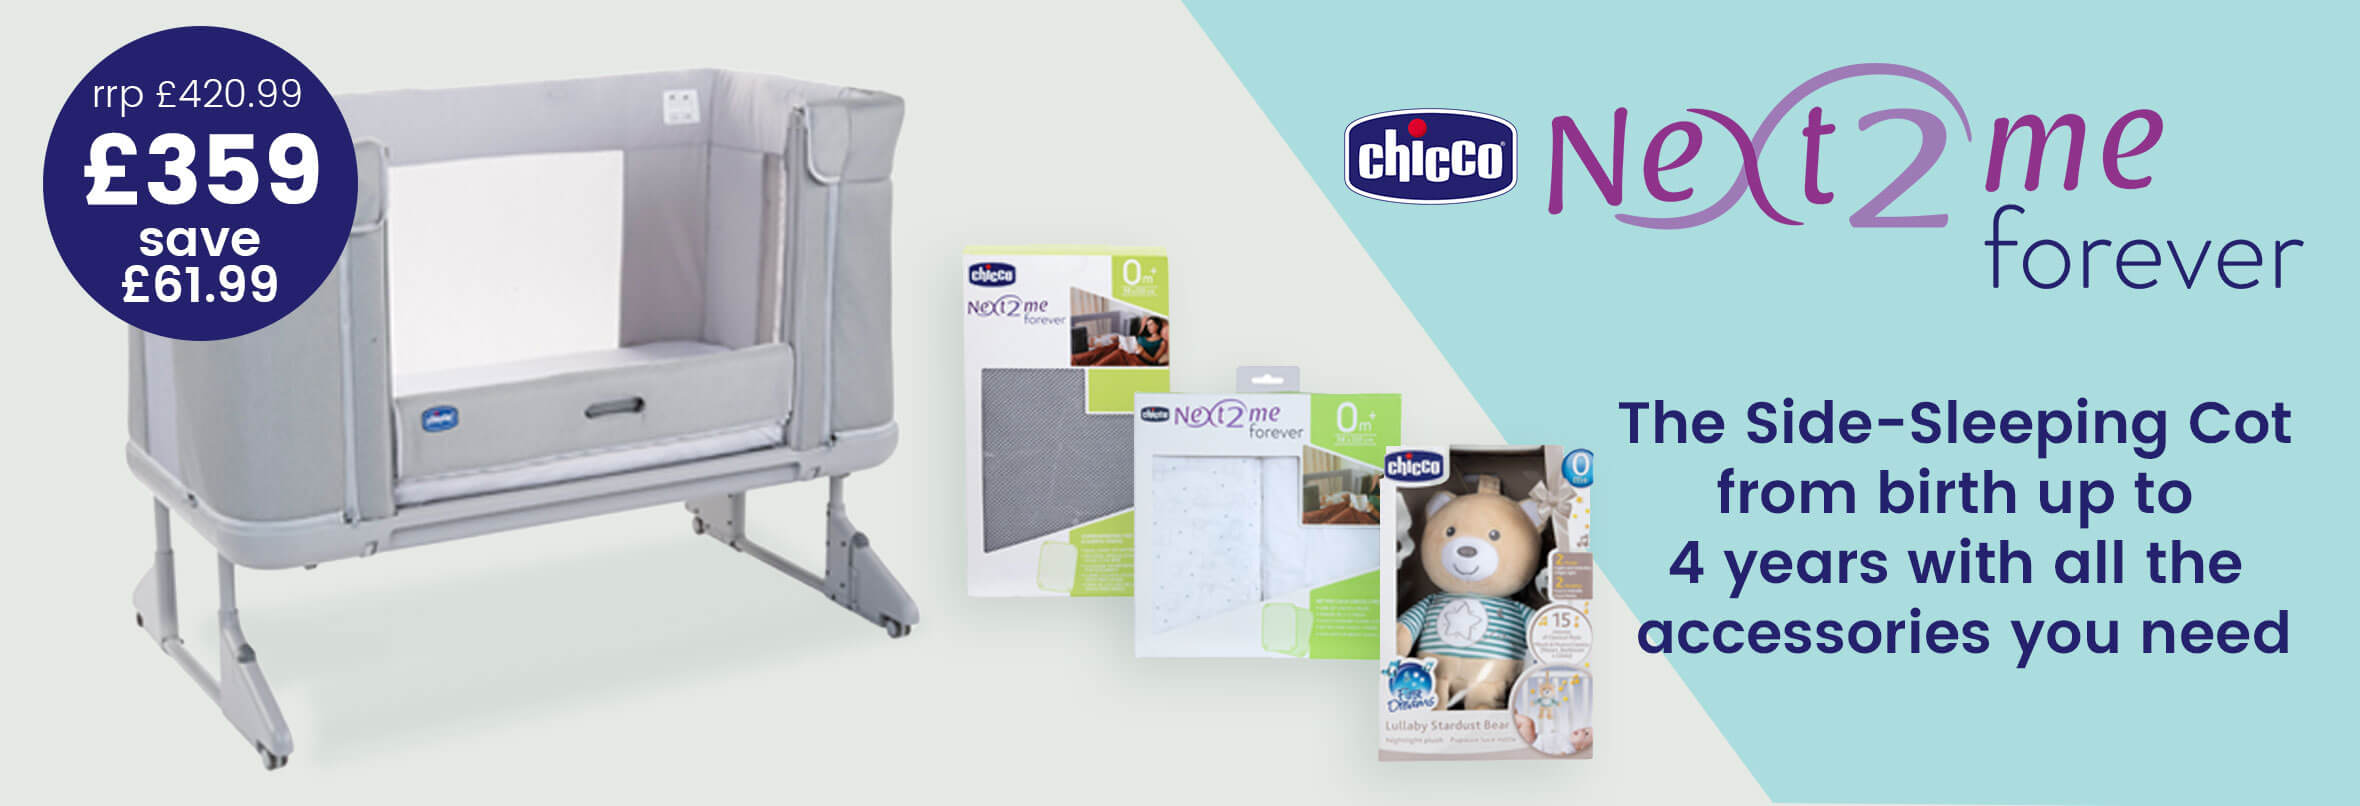 Chicco Next2Me Forever Bundle